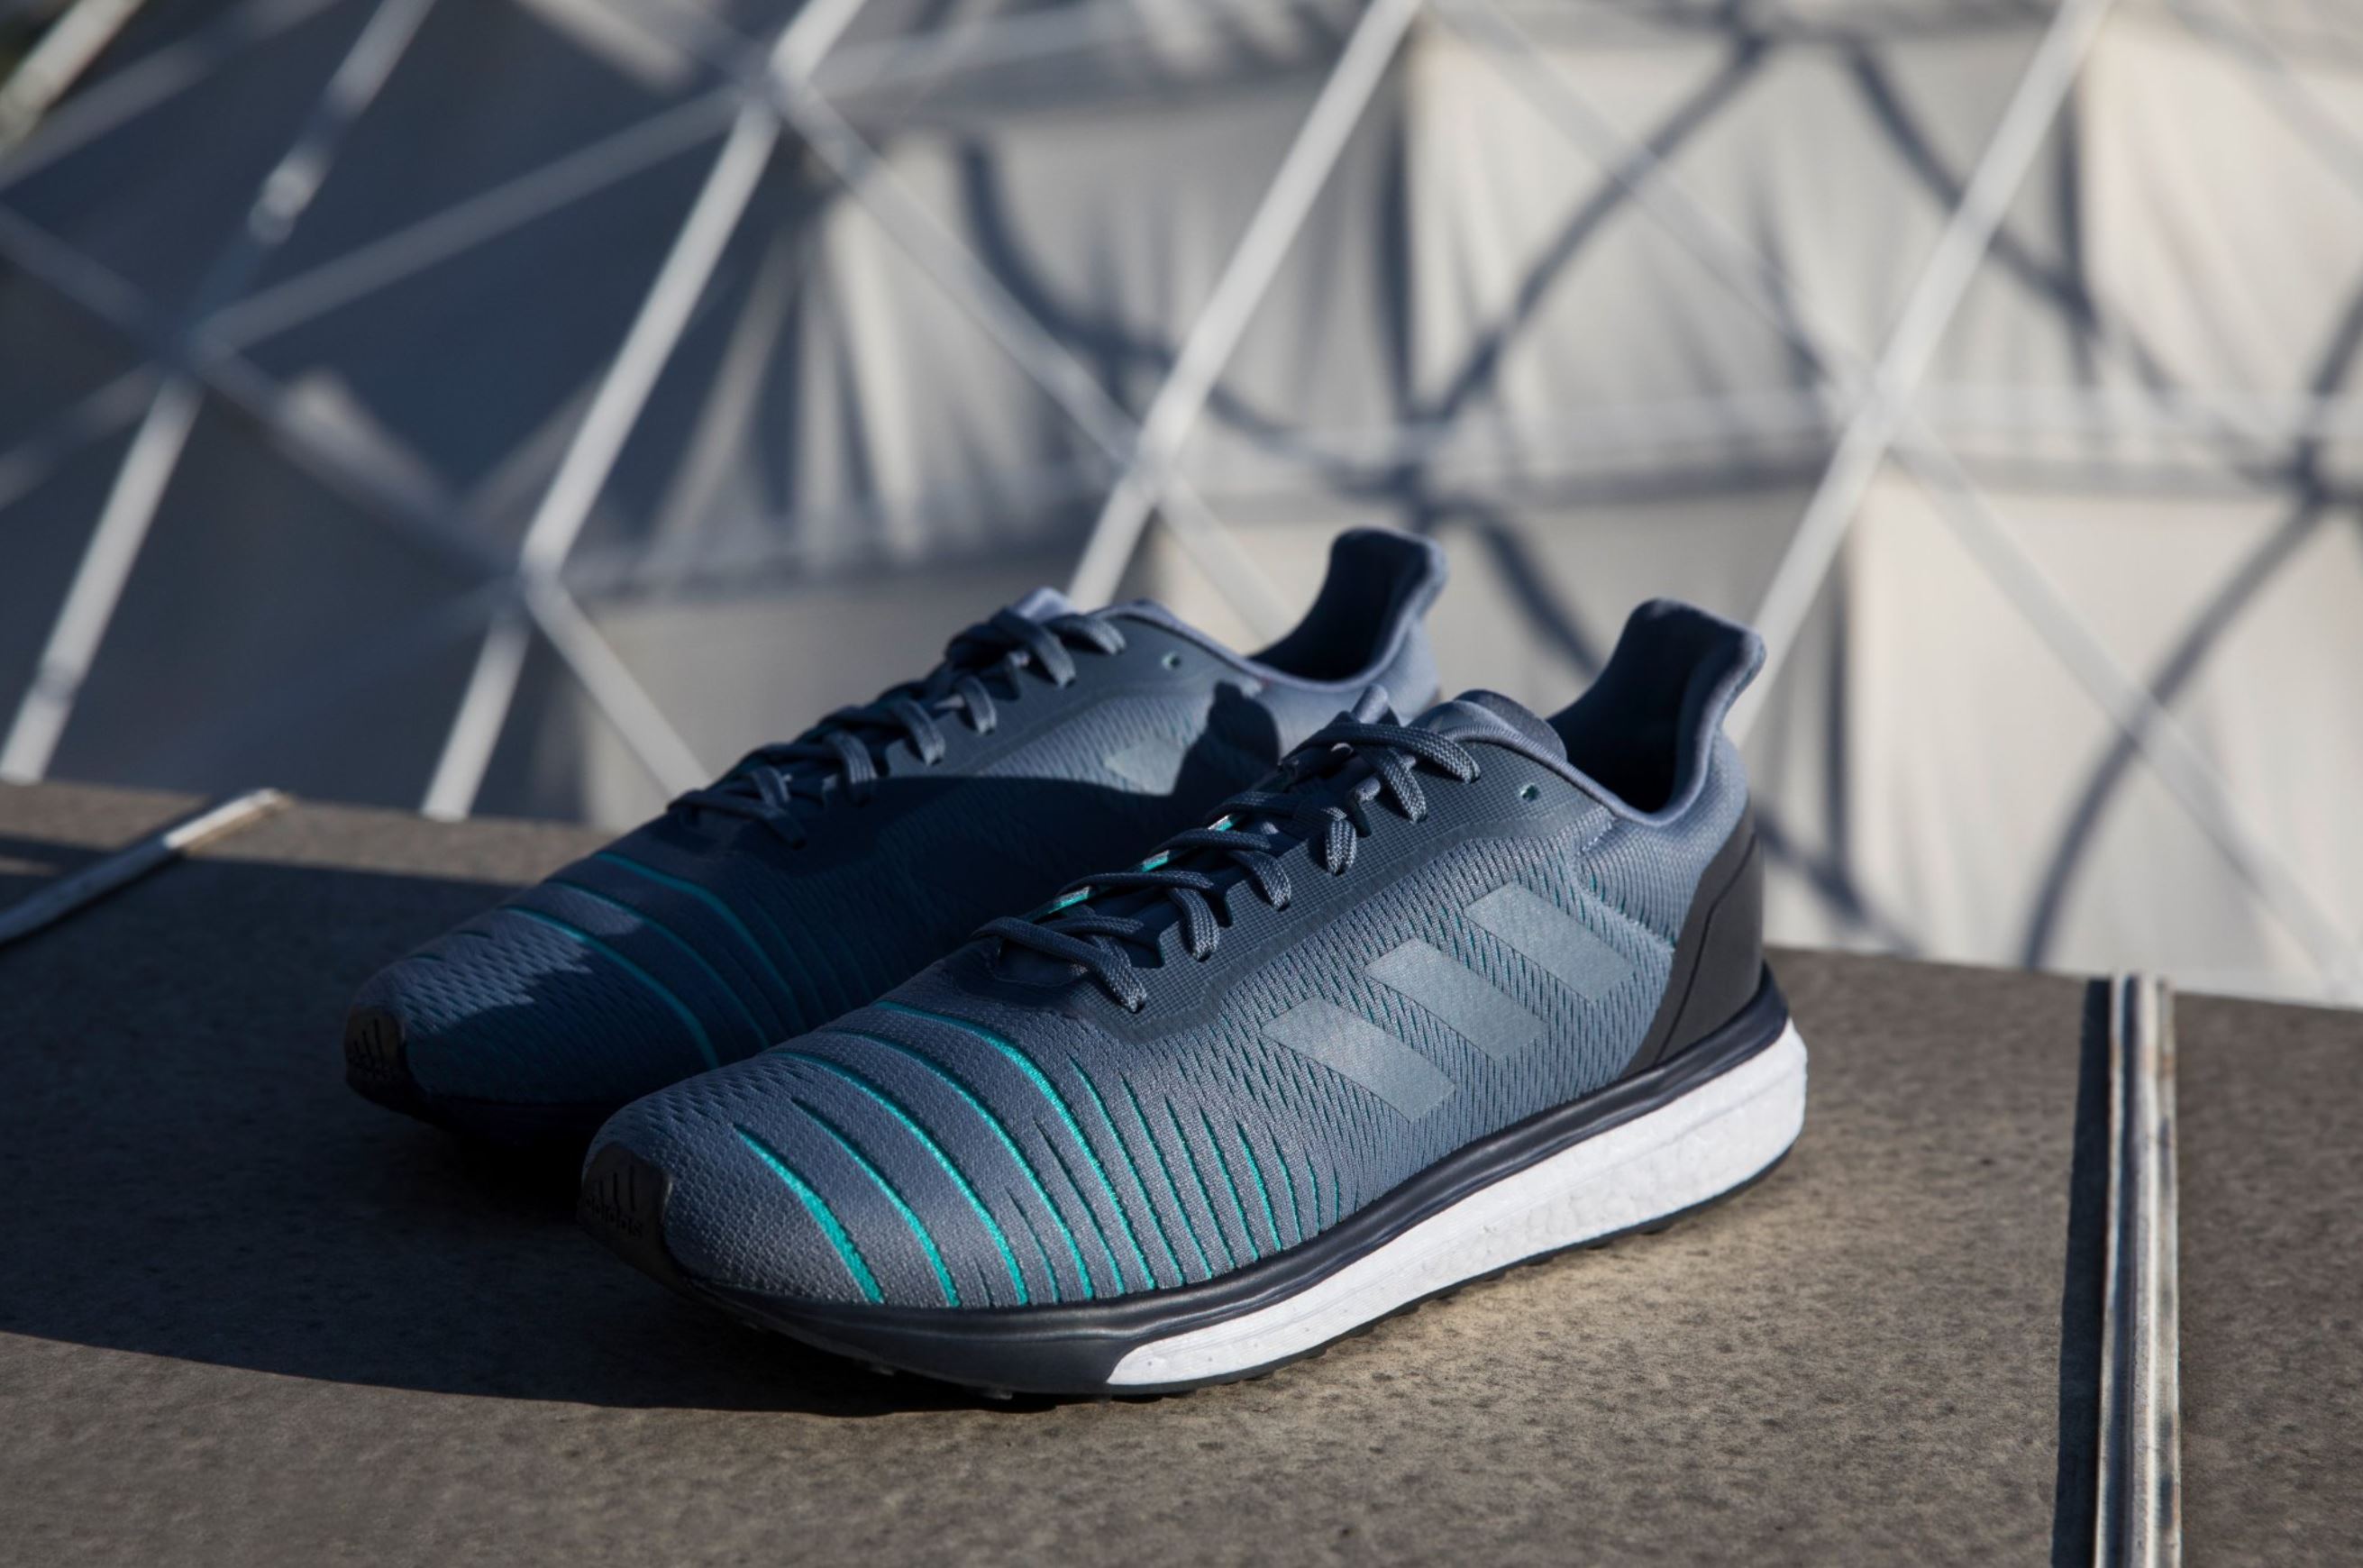 Glamor shot commentator The adidas Solar Drive is the Brand's Next Performance Runner - WearTesters